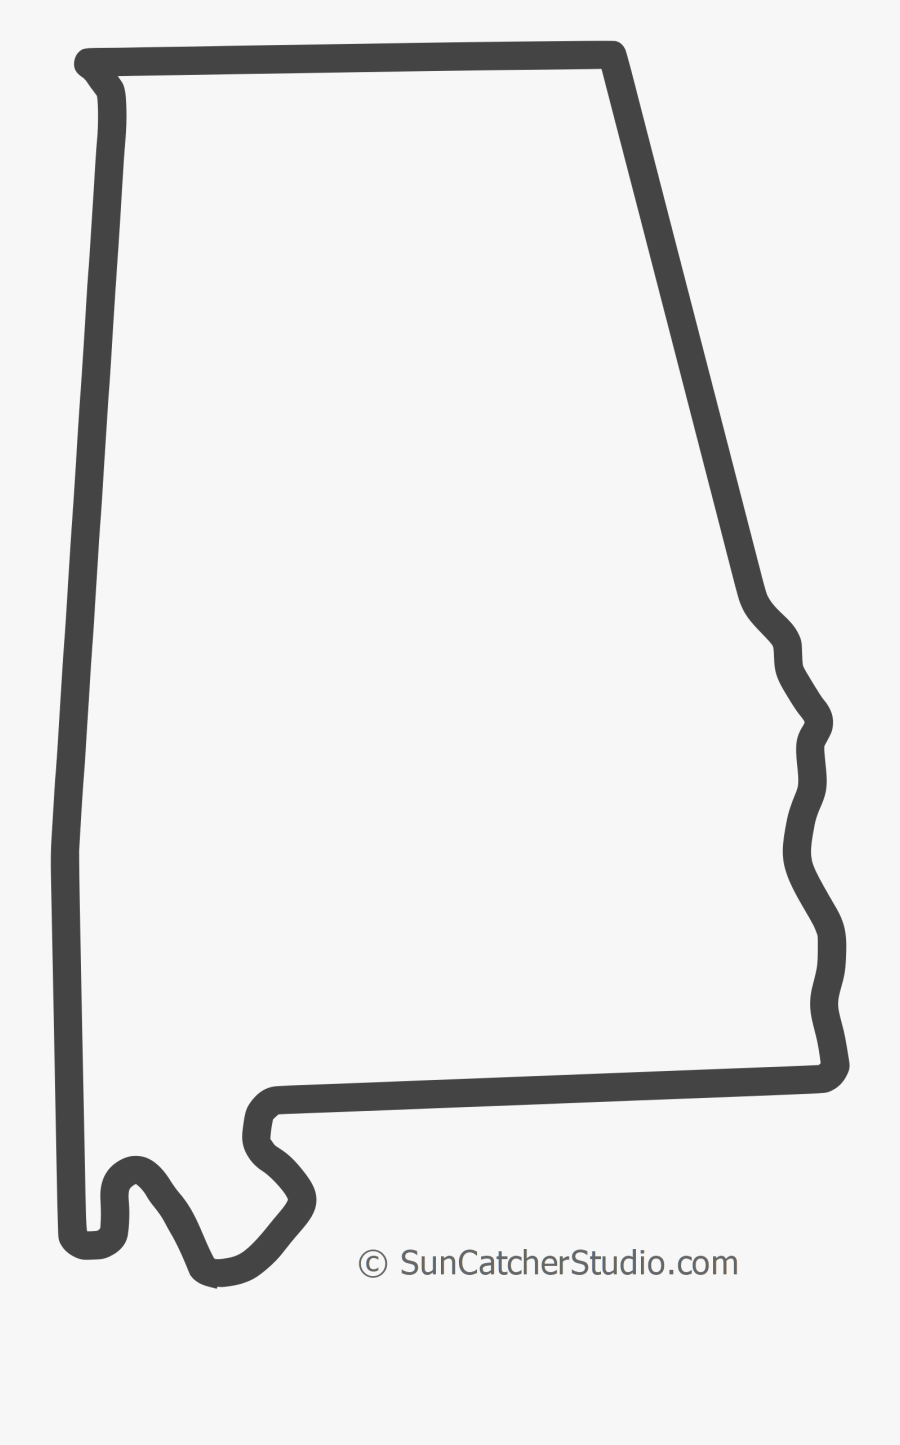 Free Alabama Outline With Home On Border, Cricut Or - State Of Alabama Svg, Transparent Clipart